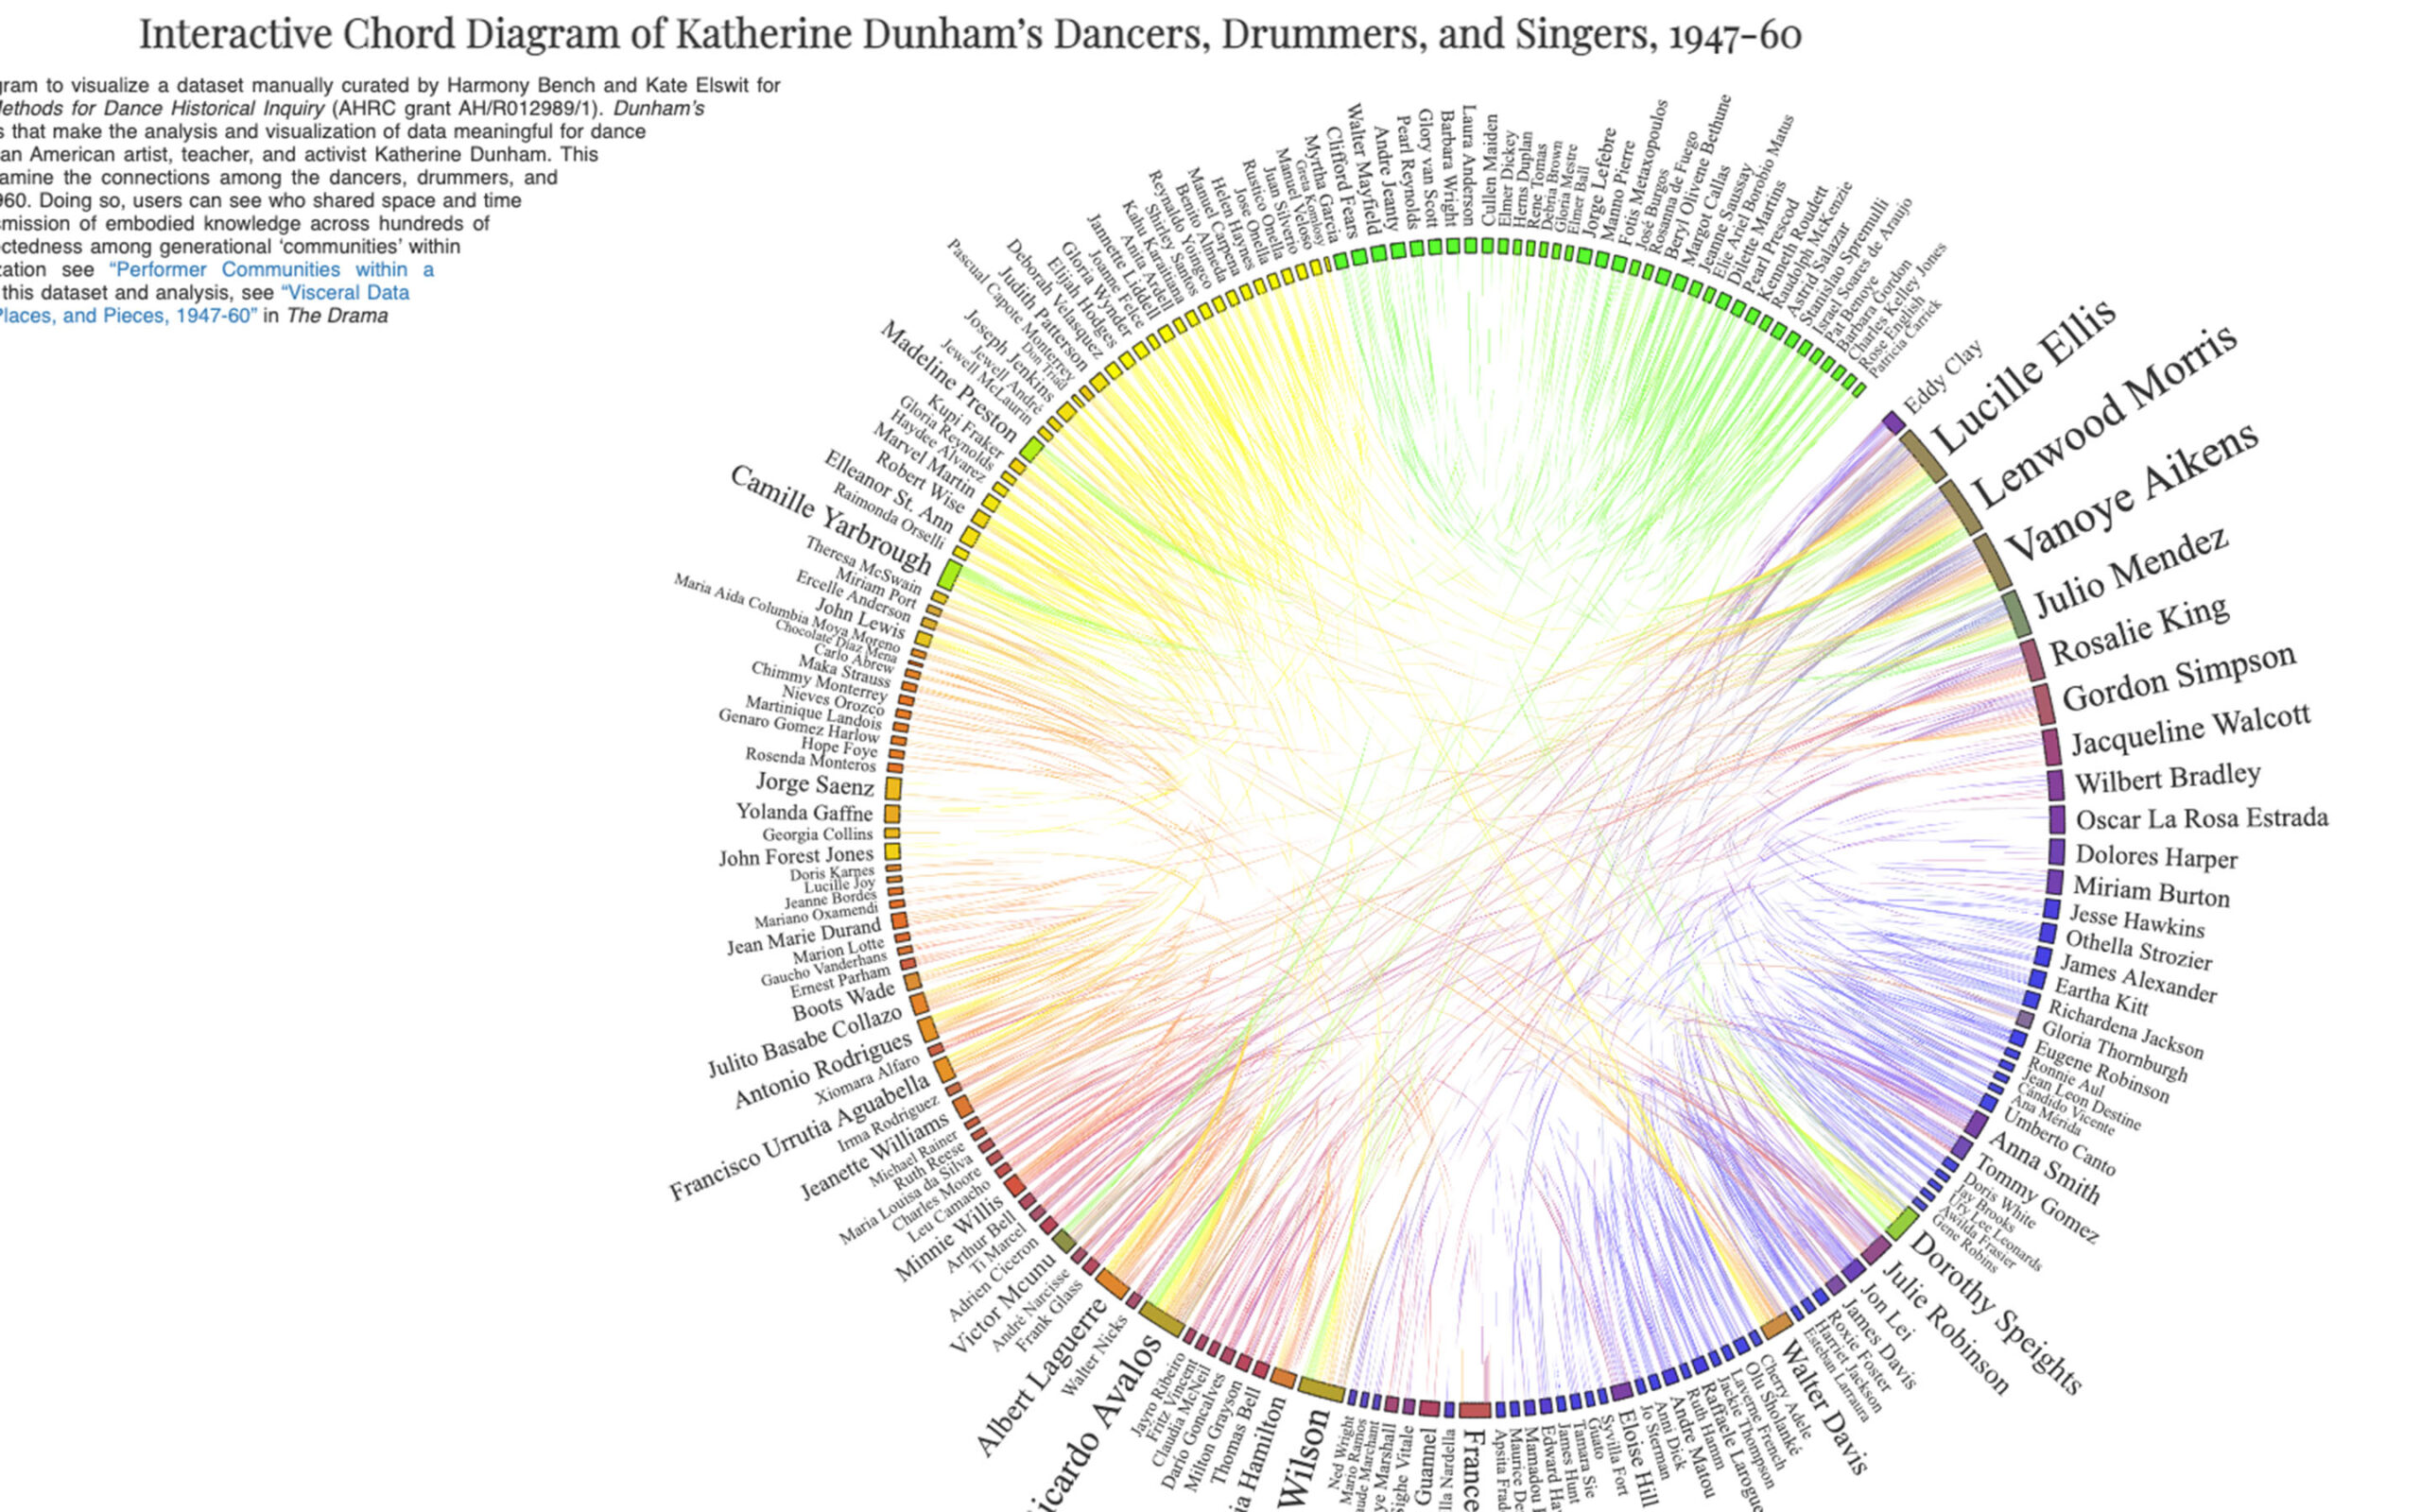 Interactive Chord Diagram of Katherine Dunham’s Dancers, Drummers, and Singers, 1947-60, from Dunham’s Data